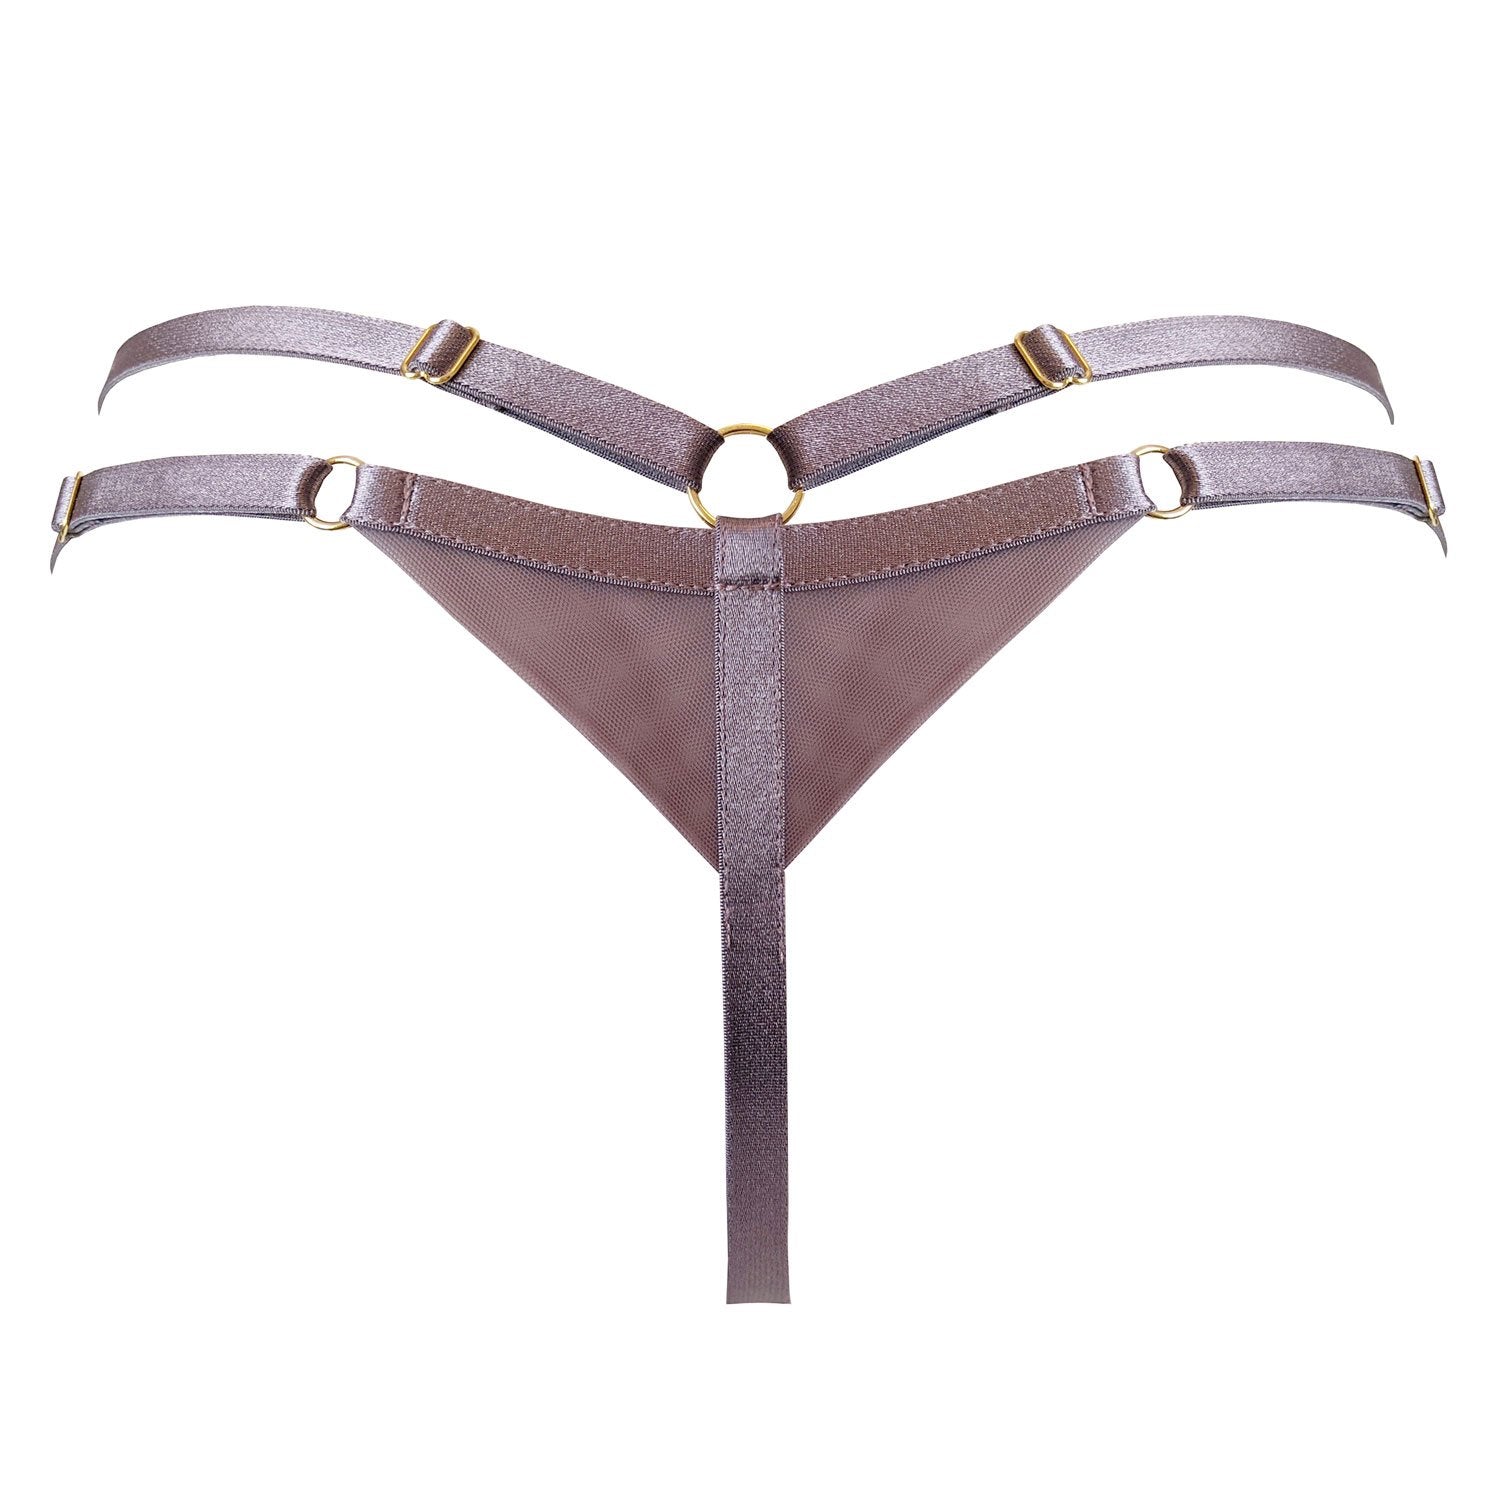 Bordelle Ula strap thong tundra purple sheer shimmer foiled mesh with gold plated o ring detail at front